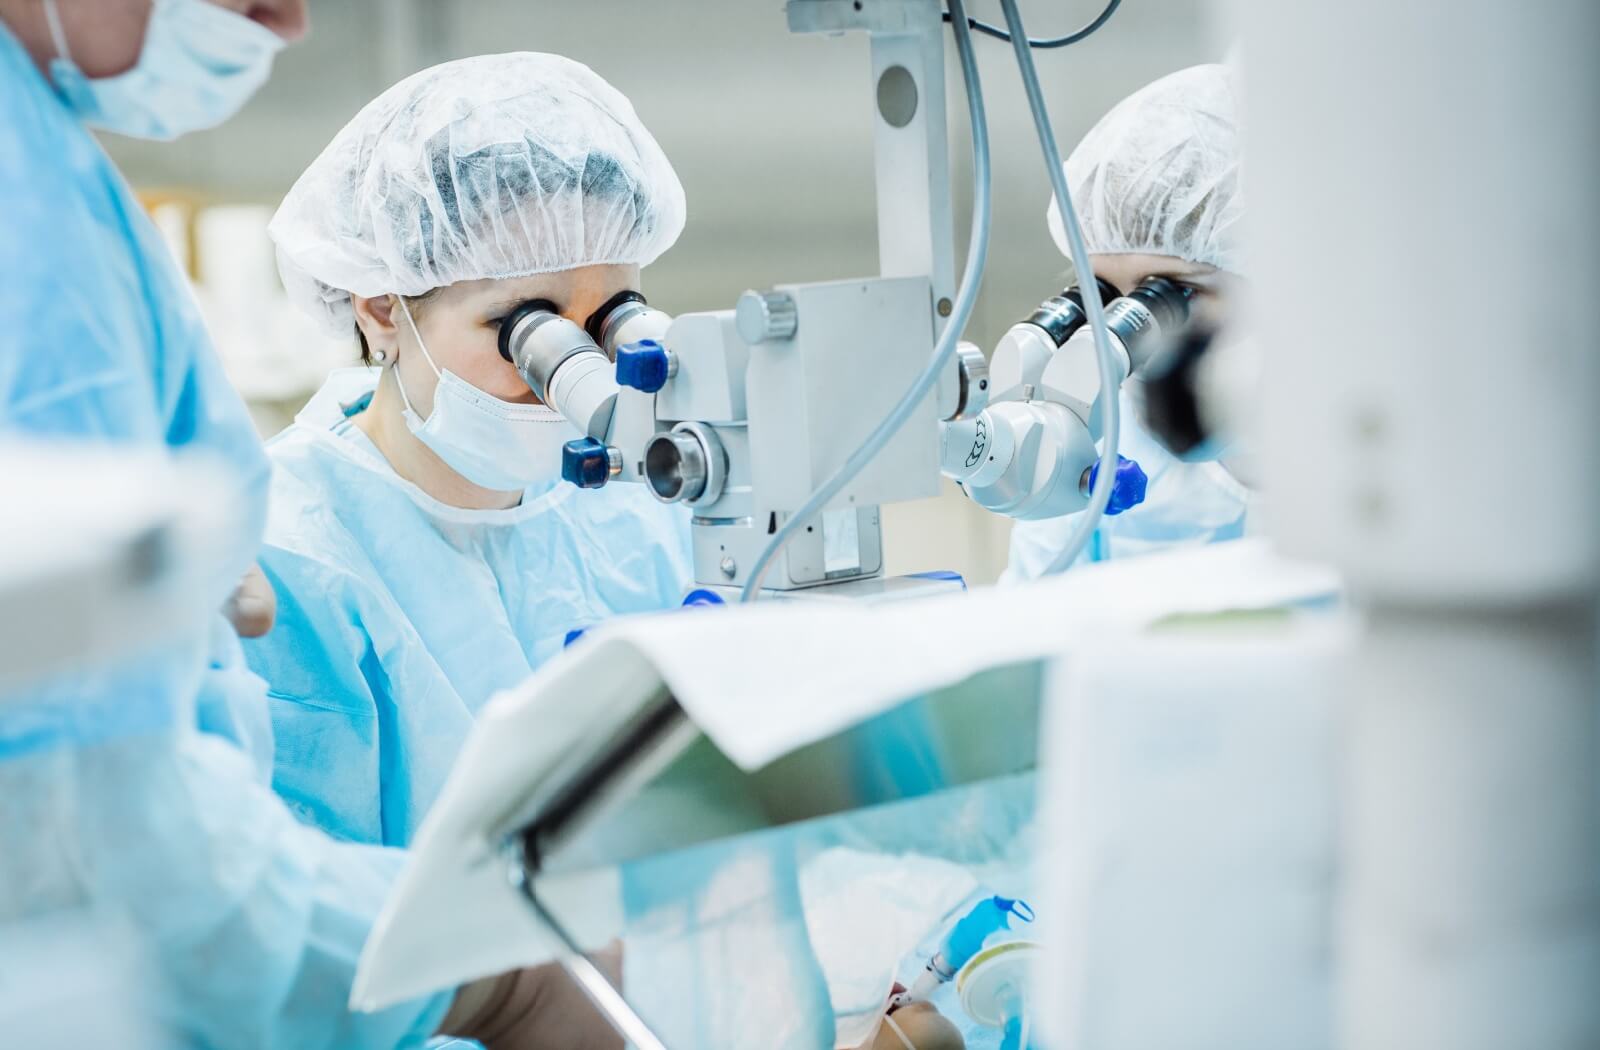 An ophthalmic surgeon performing LASIK surgery on a patient